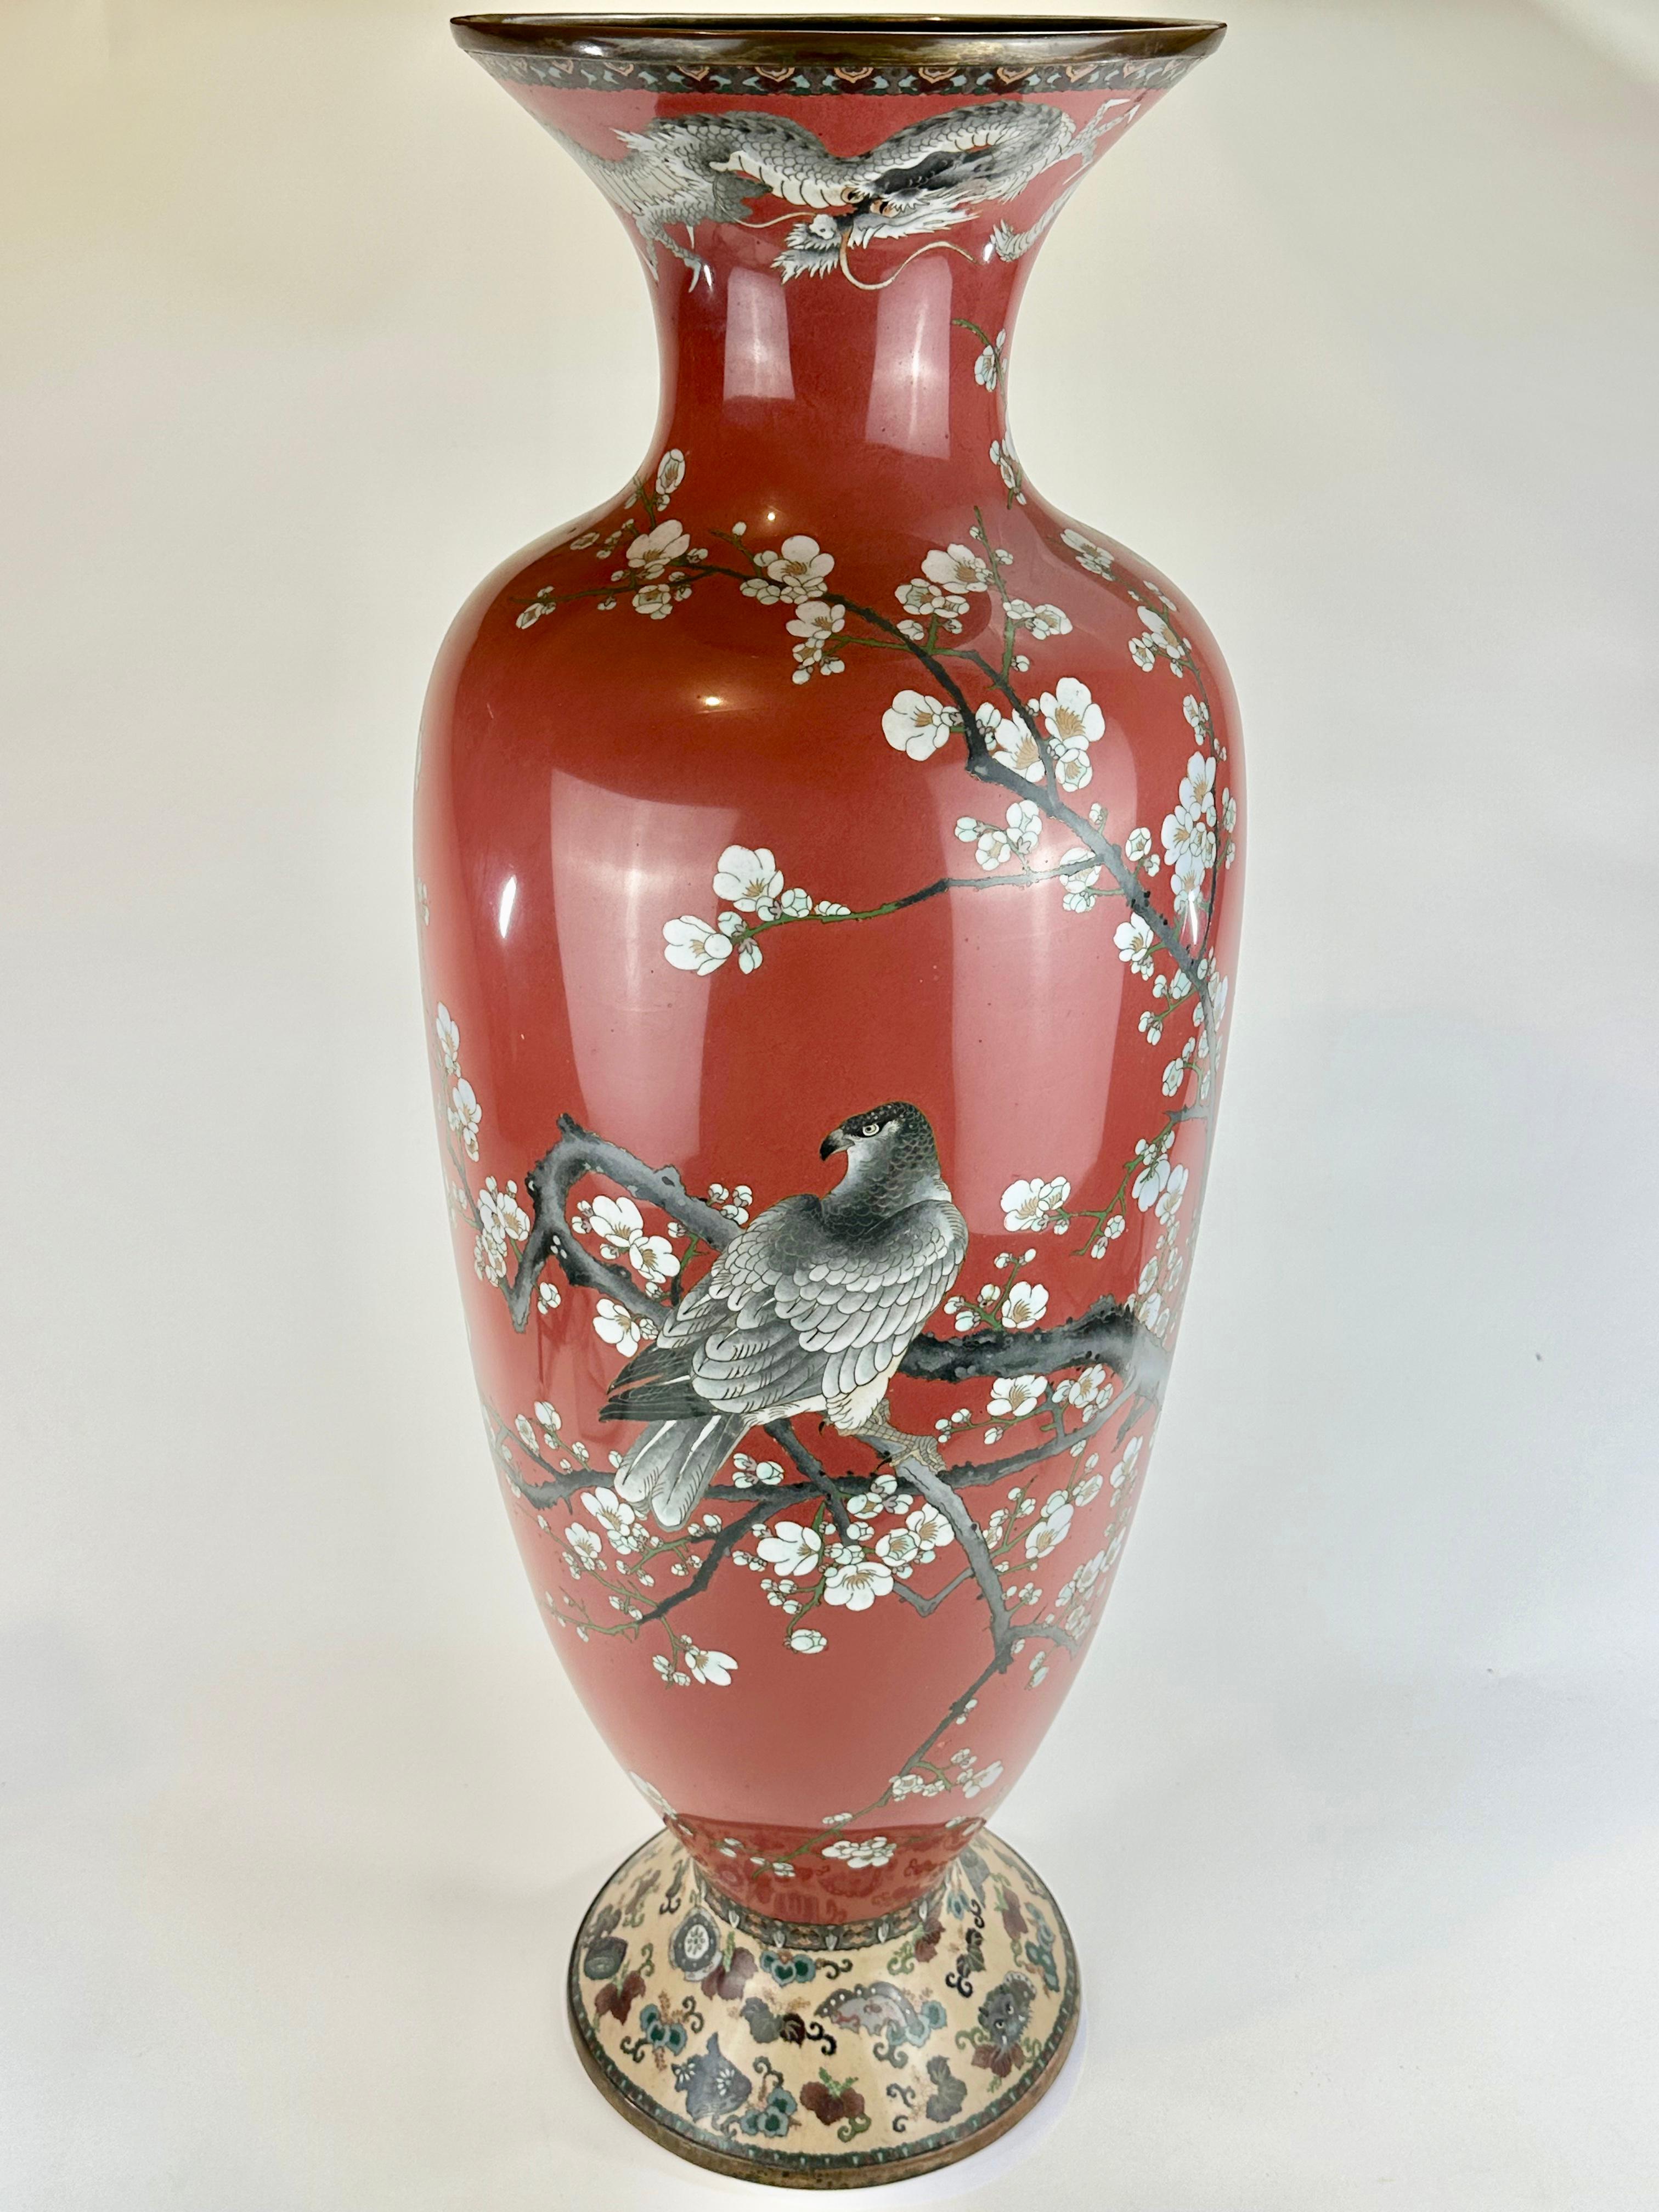 Available from Shogun's Gallery in Portland, Oregon for over 40 years specializing in Asian Arts & Antiques.

This is a unique Japanese Meiji era (c. 1890) ornate Cloisonné vase. Made of copper, copper alloys and vitreous glass enamel. 

This vase